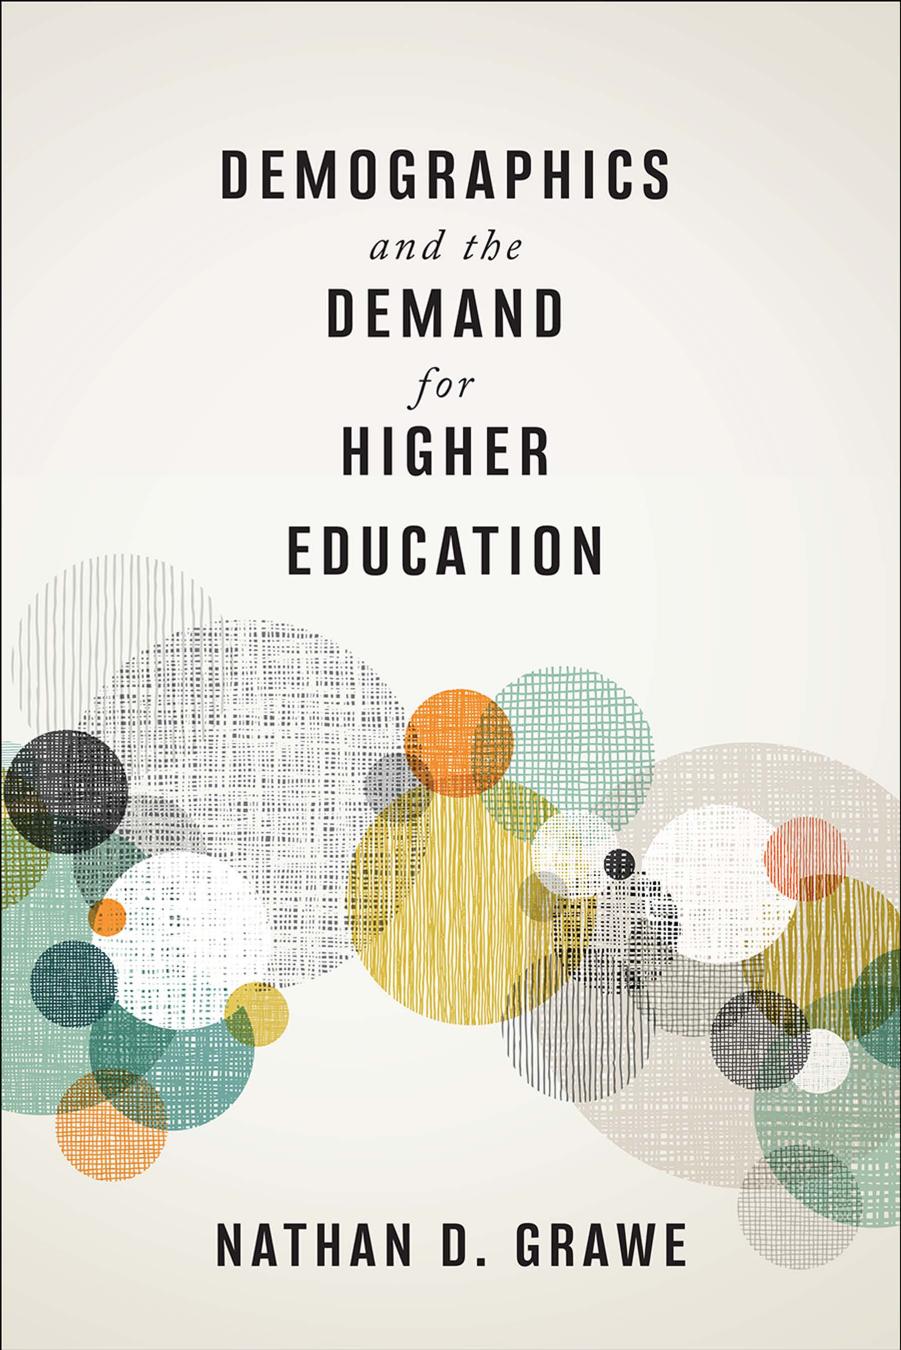 Demographics and the Demand for Higher Education by Nathan D. Grawe